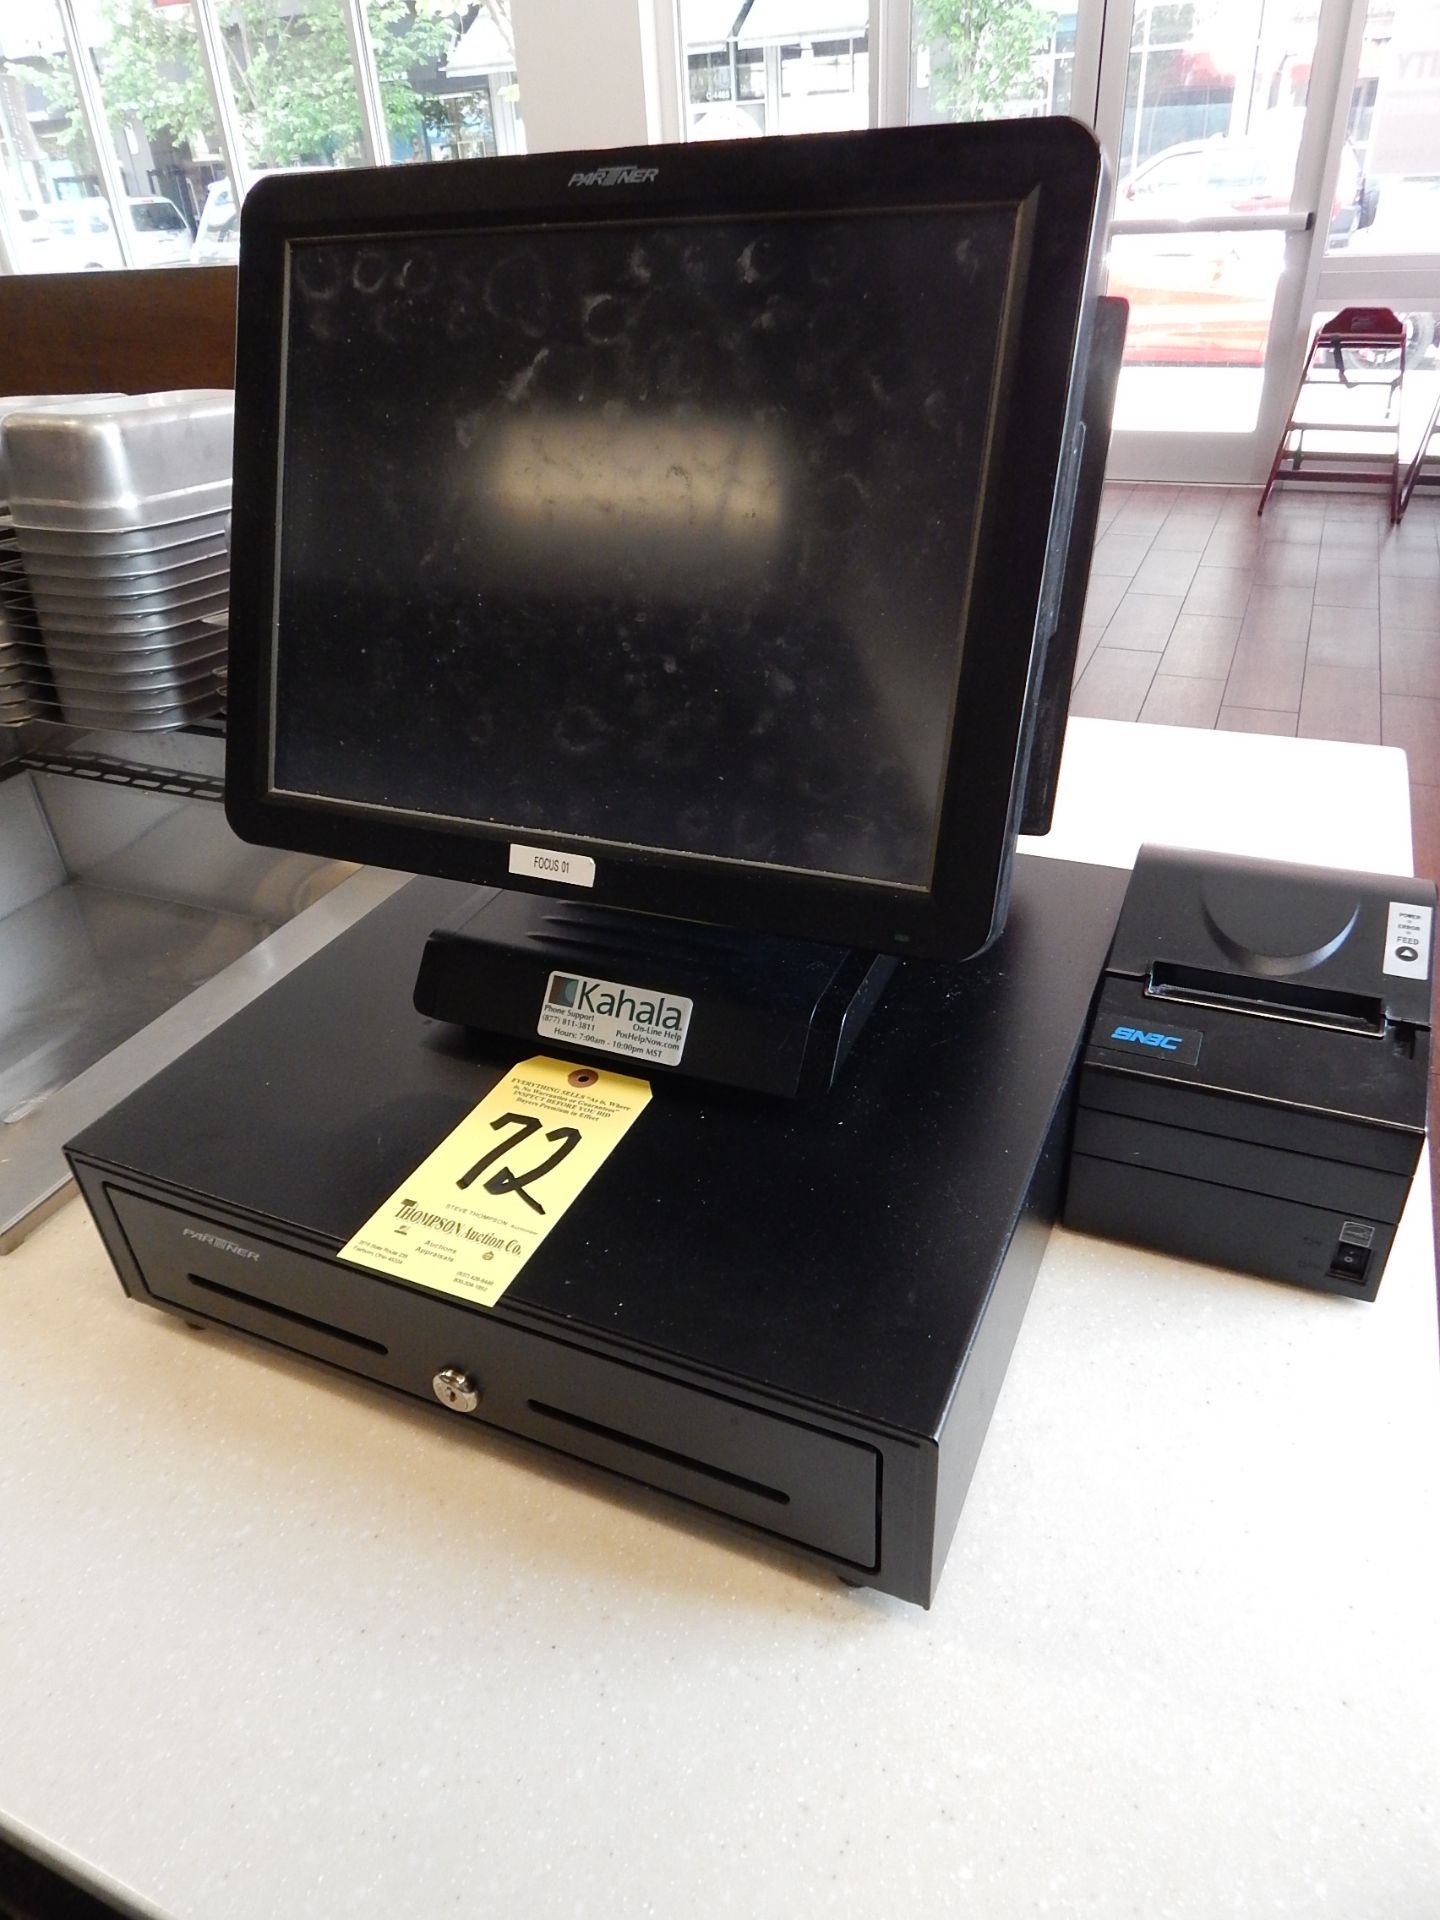 Kahala POS System with (2) Cash Registers and (4) Additional Monitors